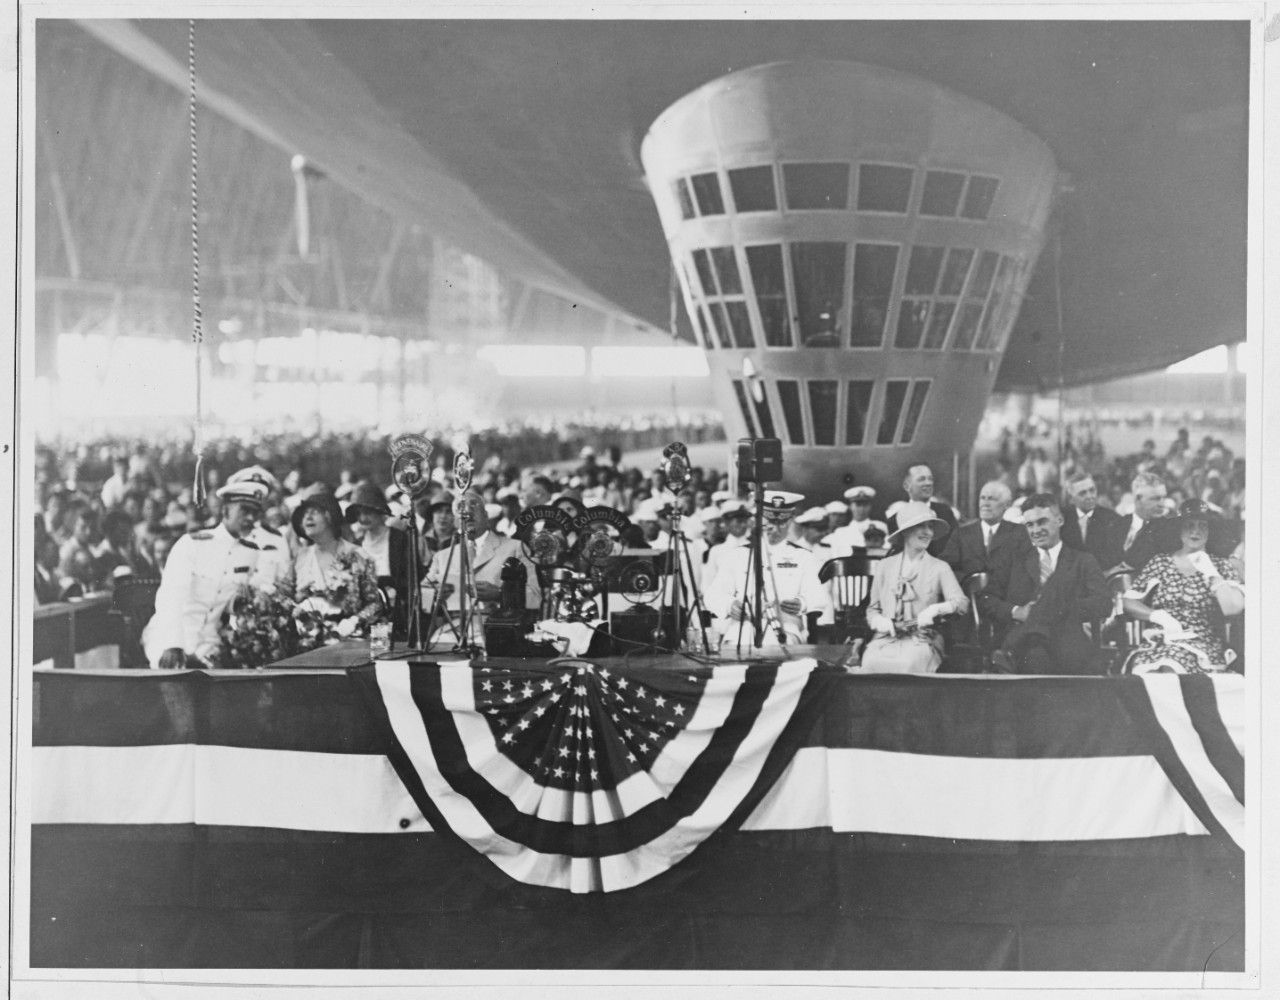 Photo #: NH 42167  Christening of USS Akron (ZRS-4), 8 August 1931